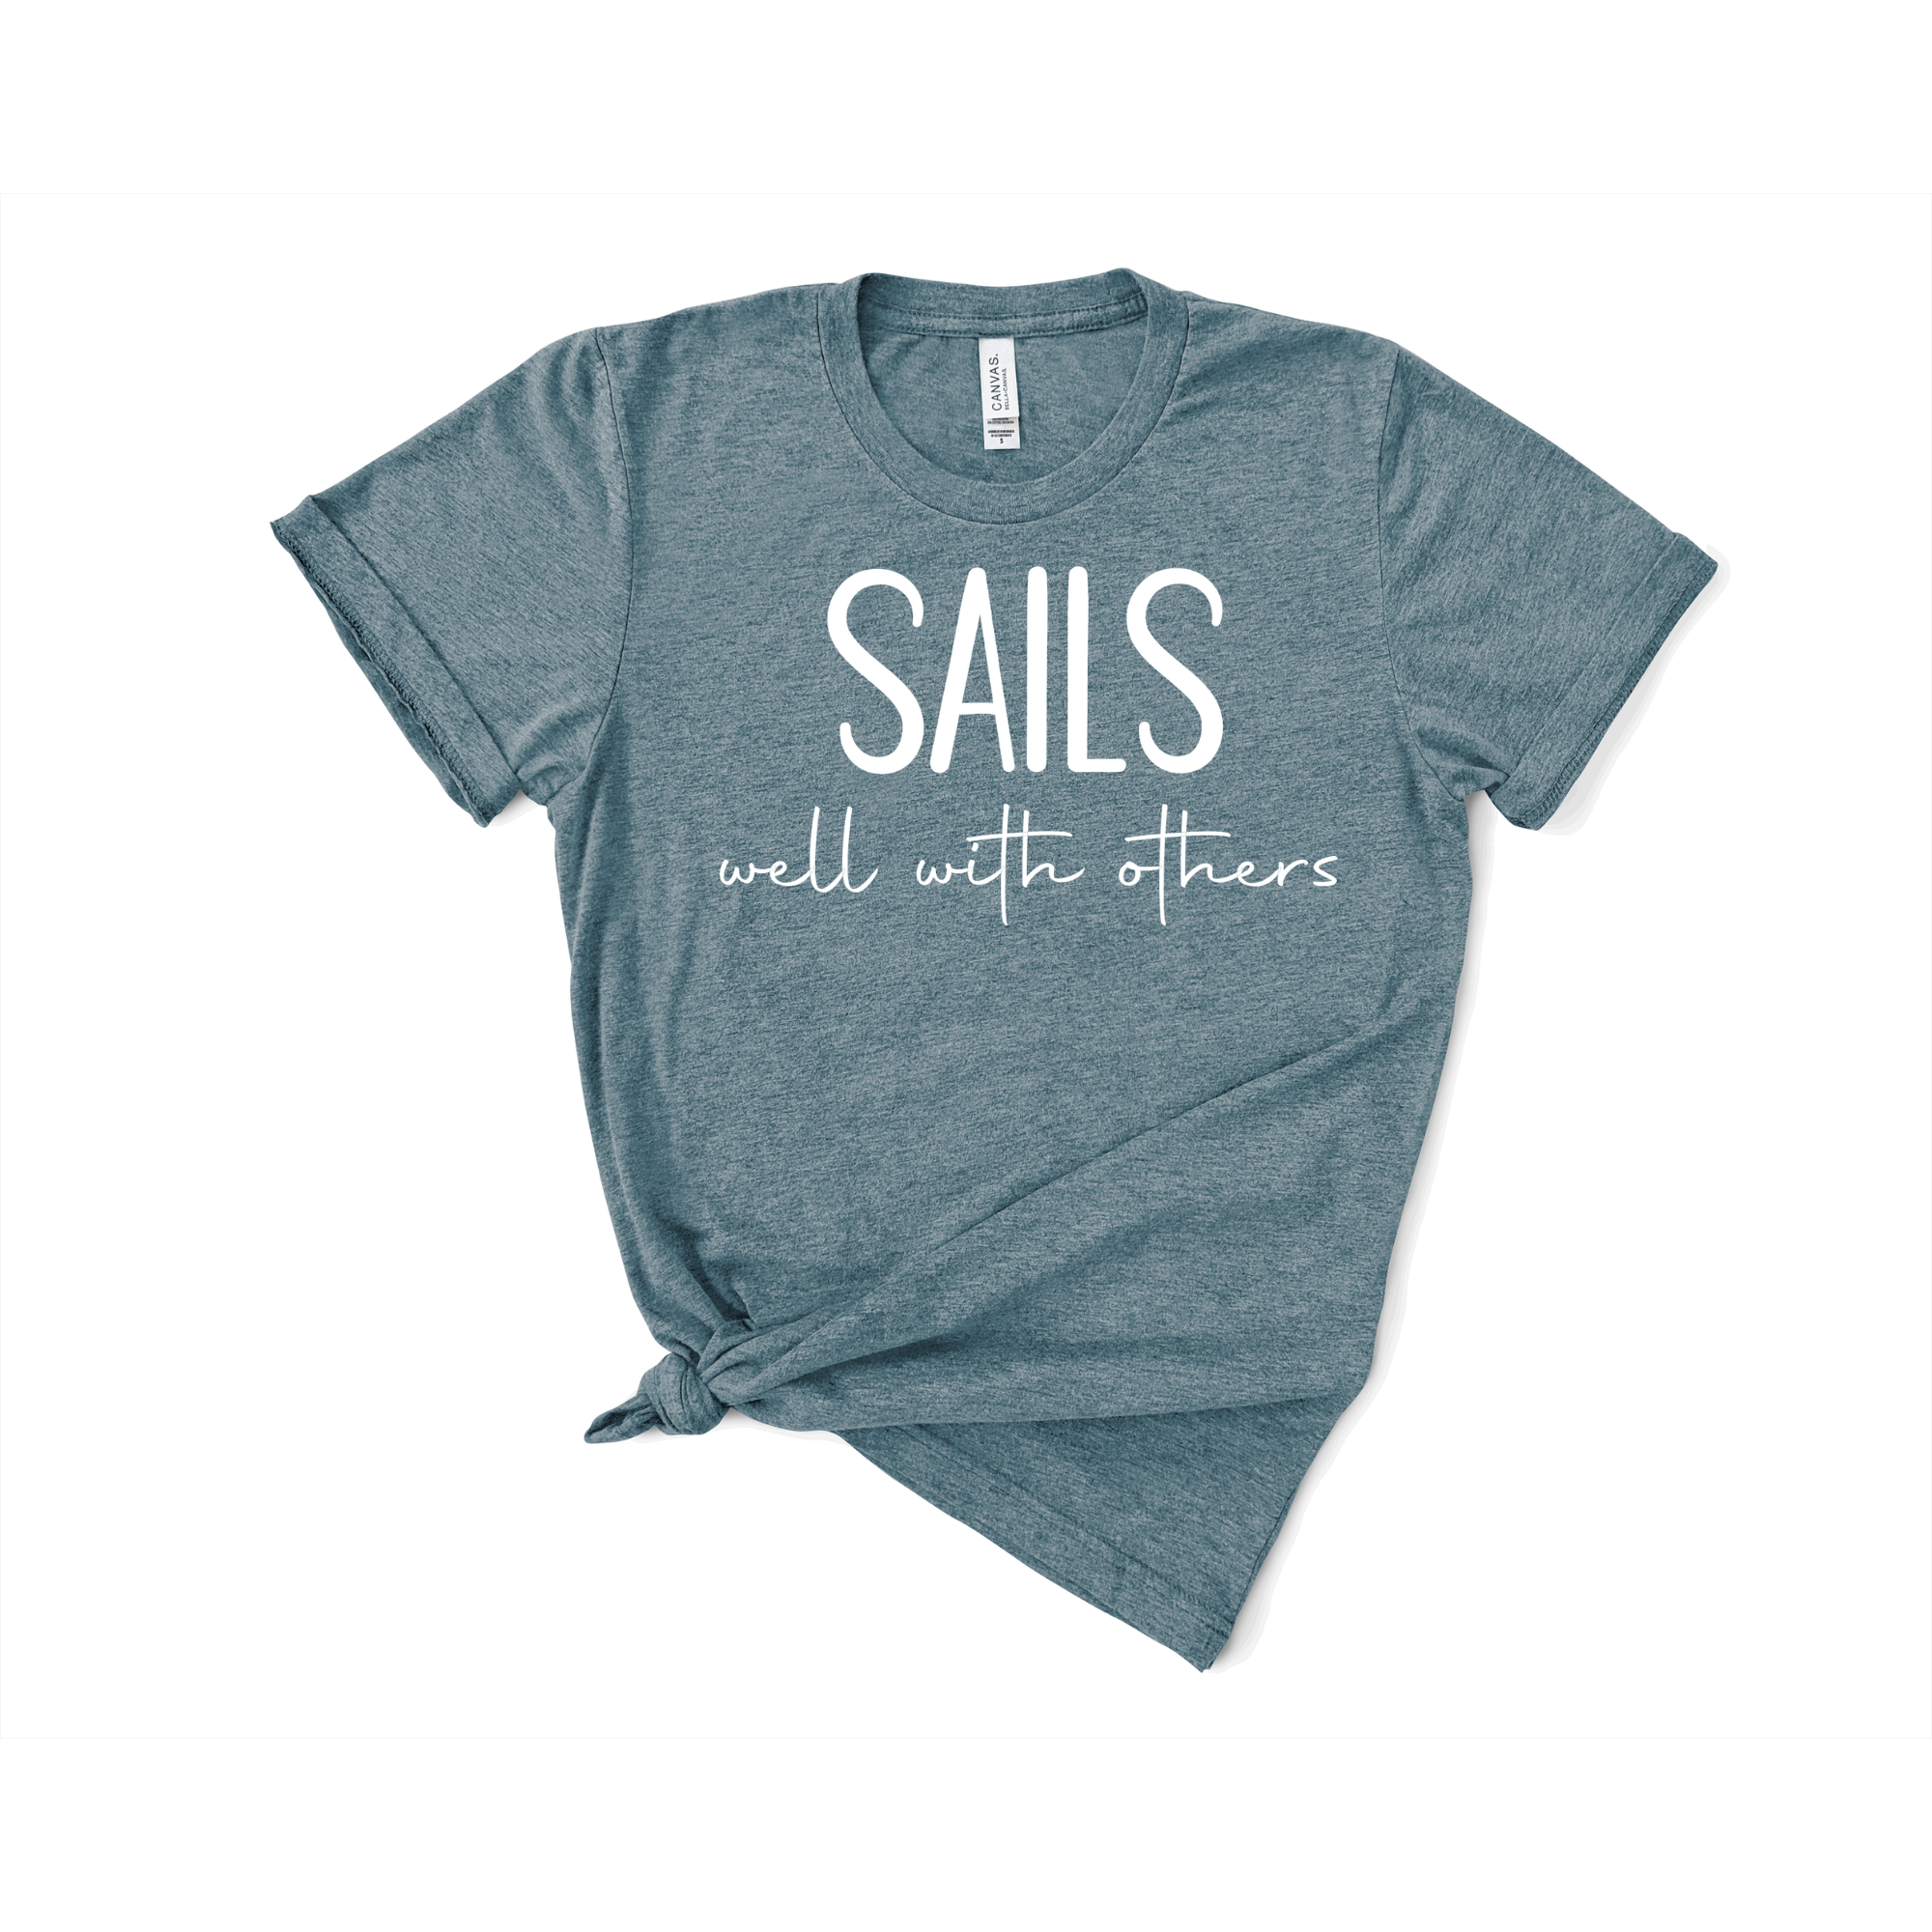 Sails well with others Graphic Tee – Harbor + Sails